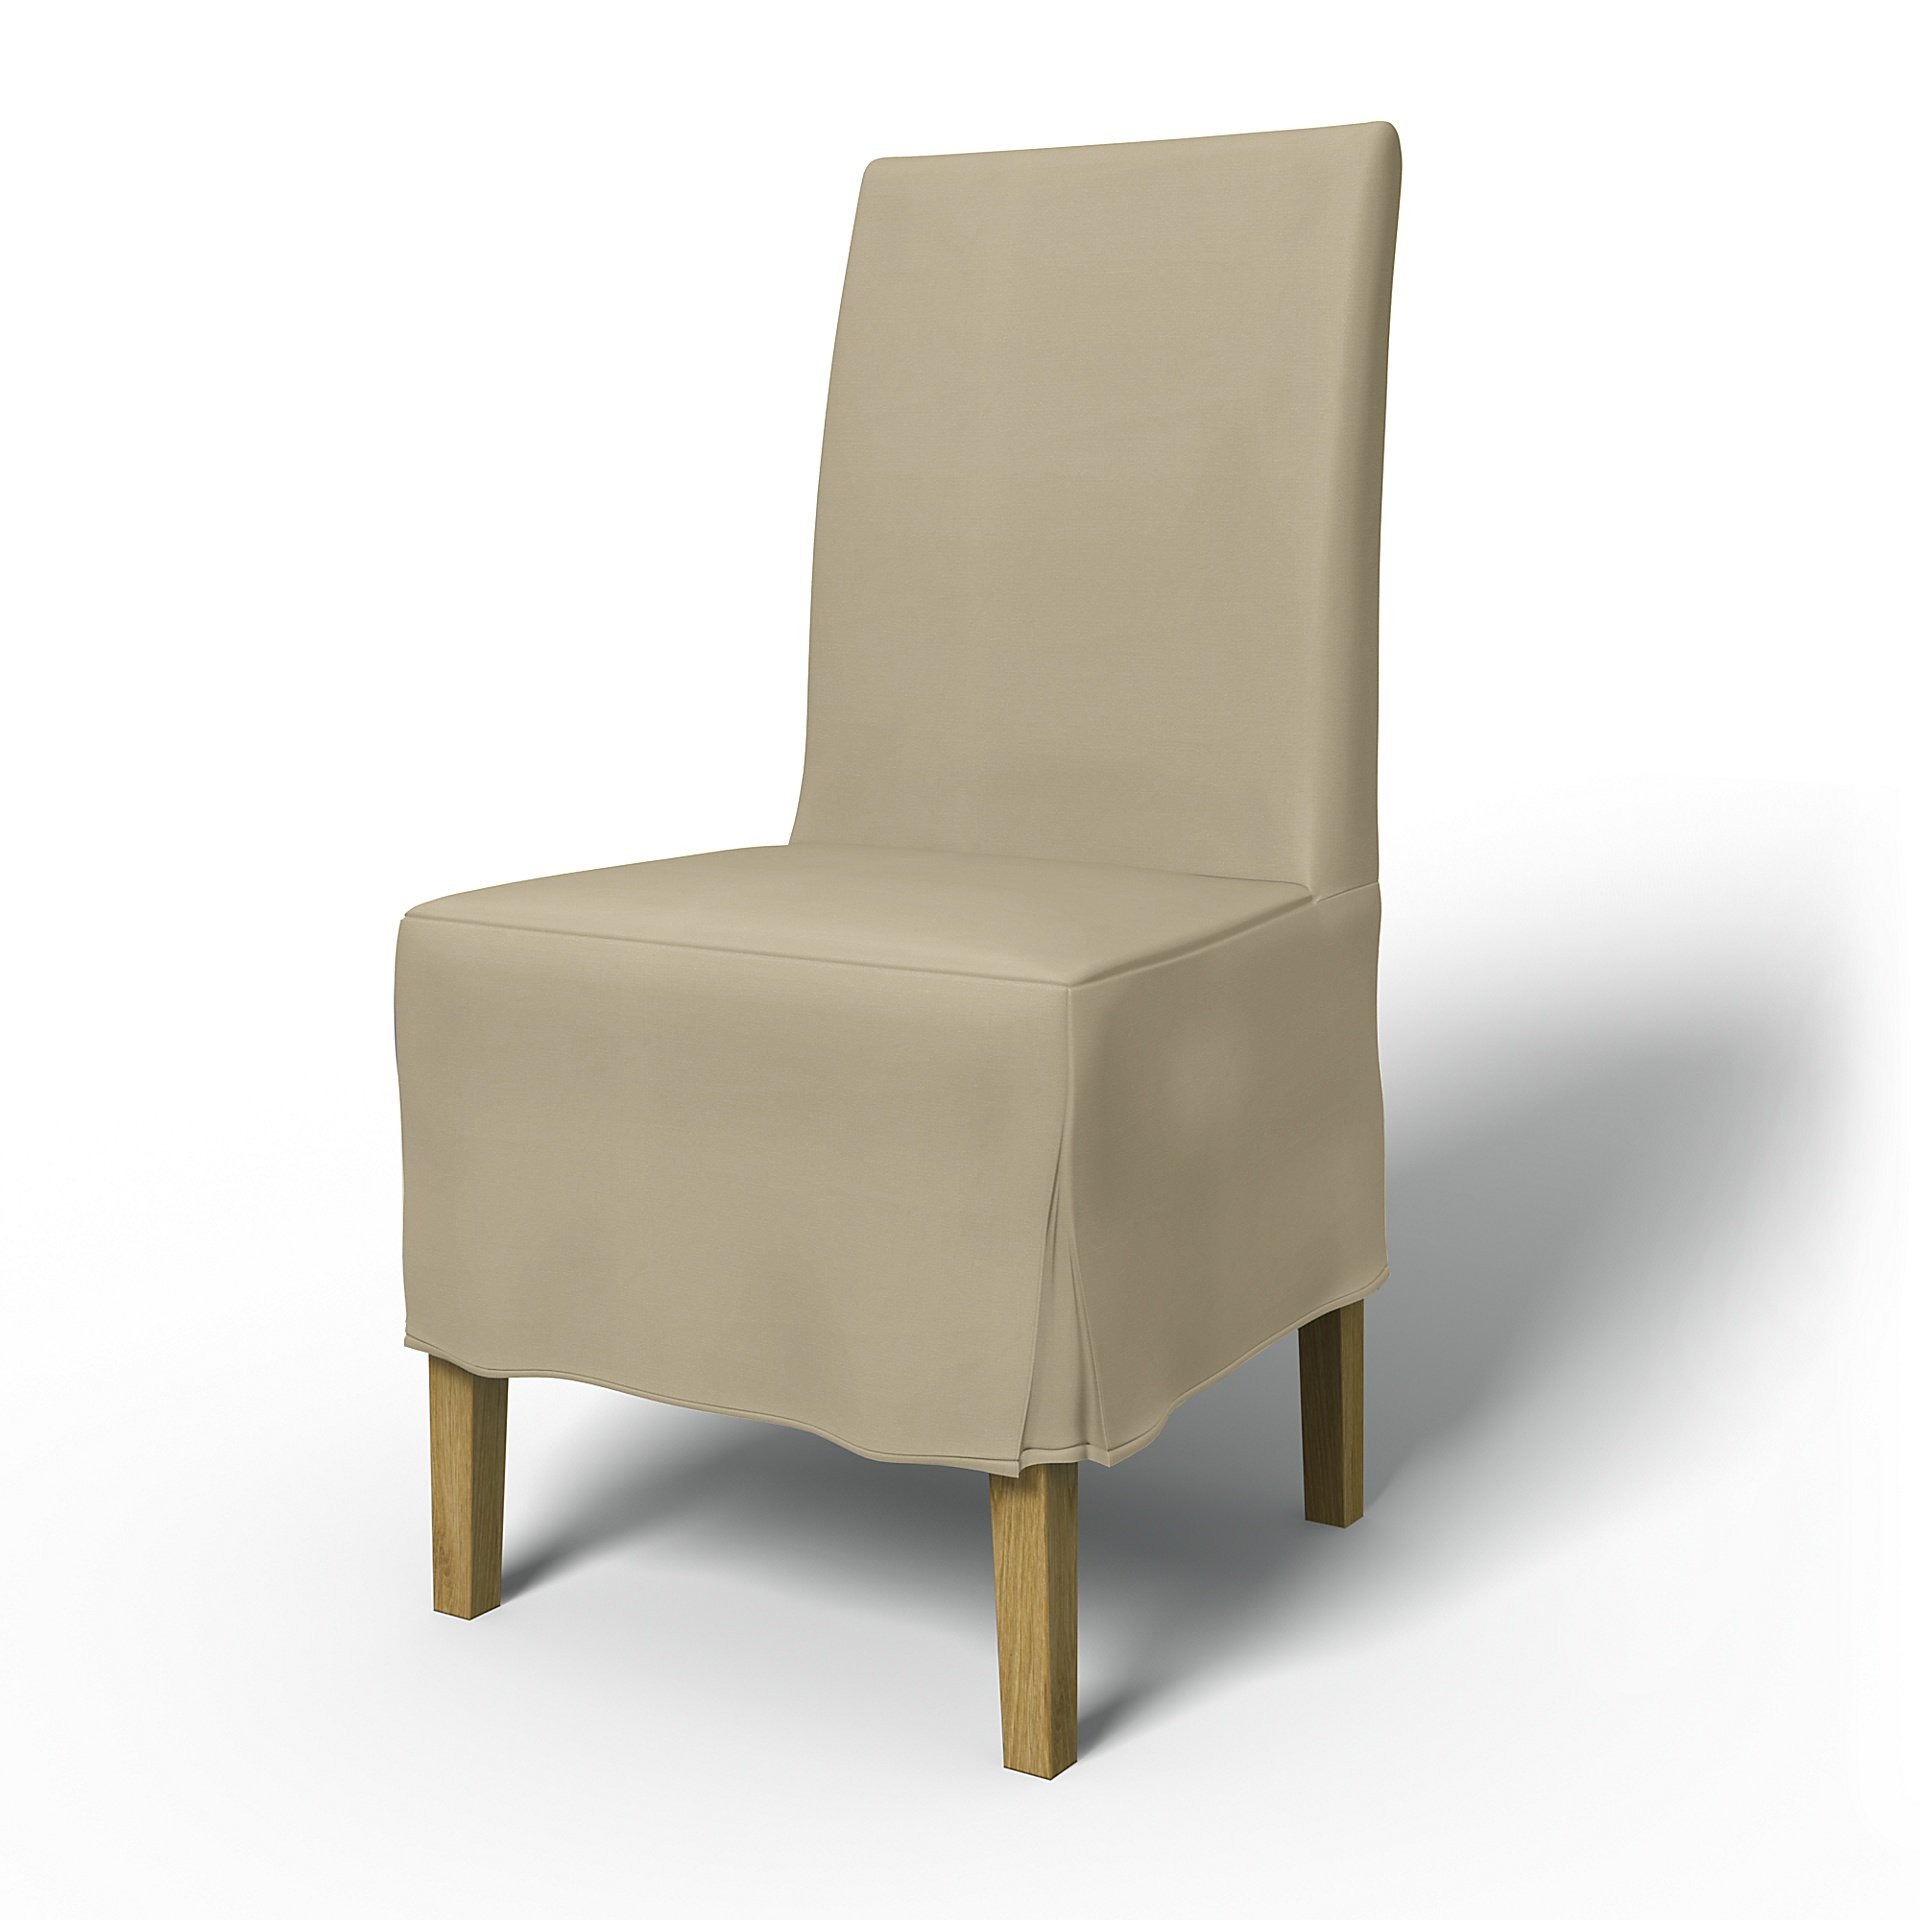 IKEA - Henriksdal Dining Chair Cover Medium skirt with Box Pleat (Standard model), Sand Beige, Cotto